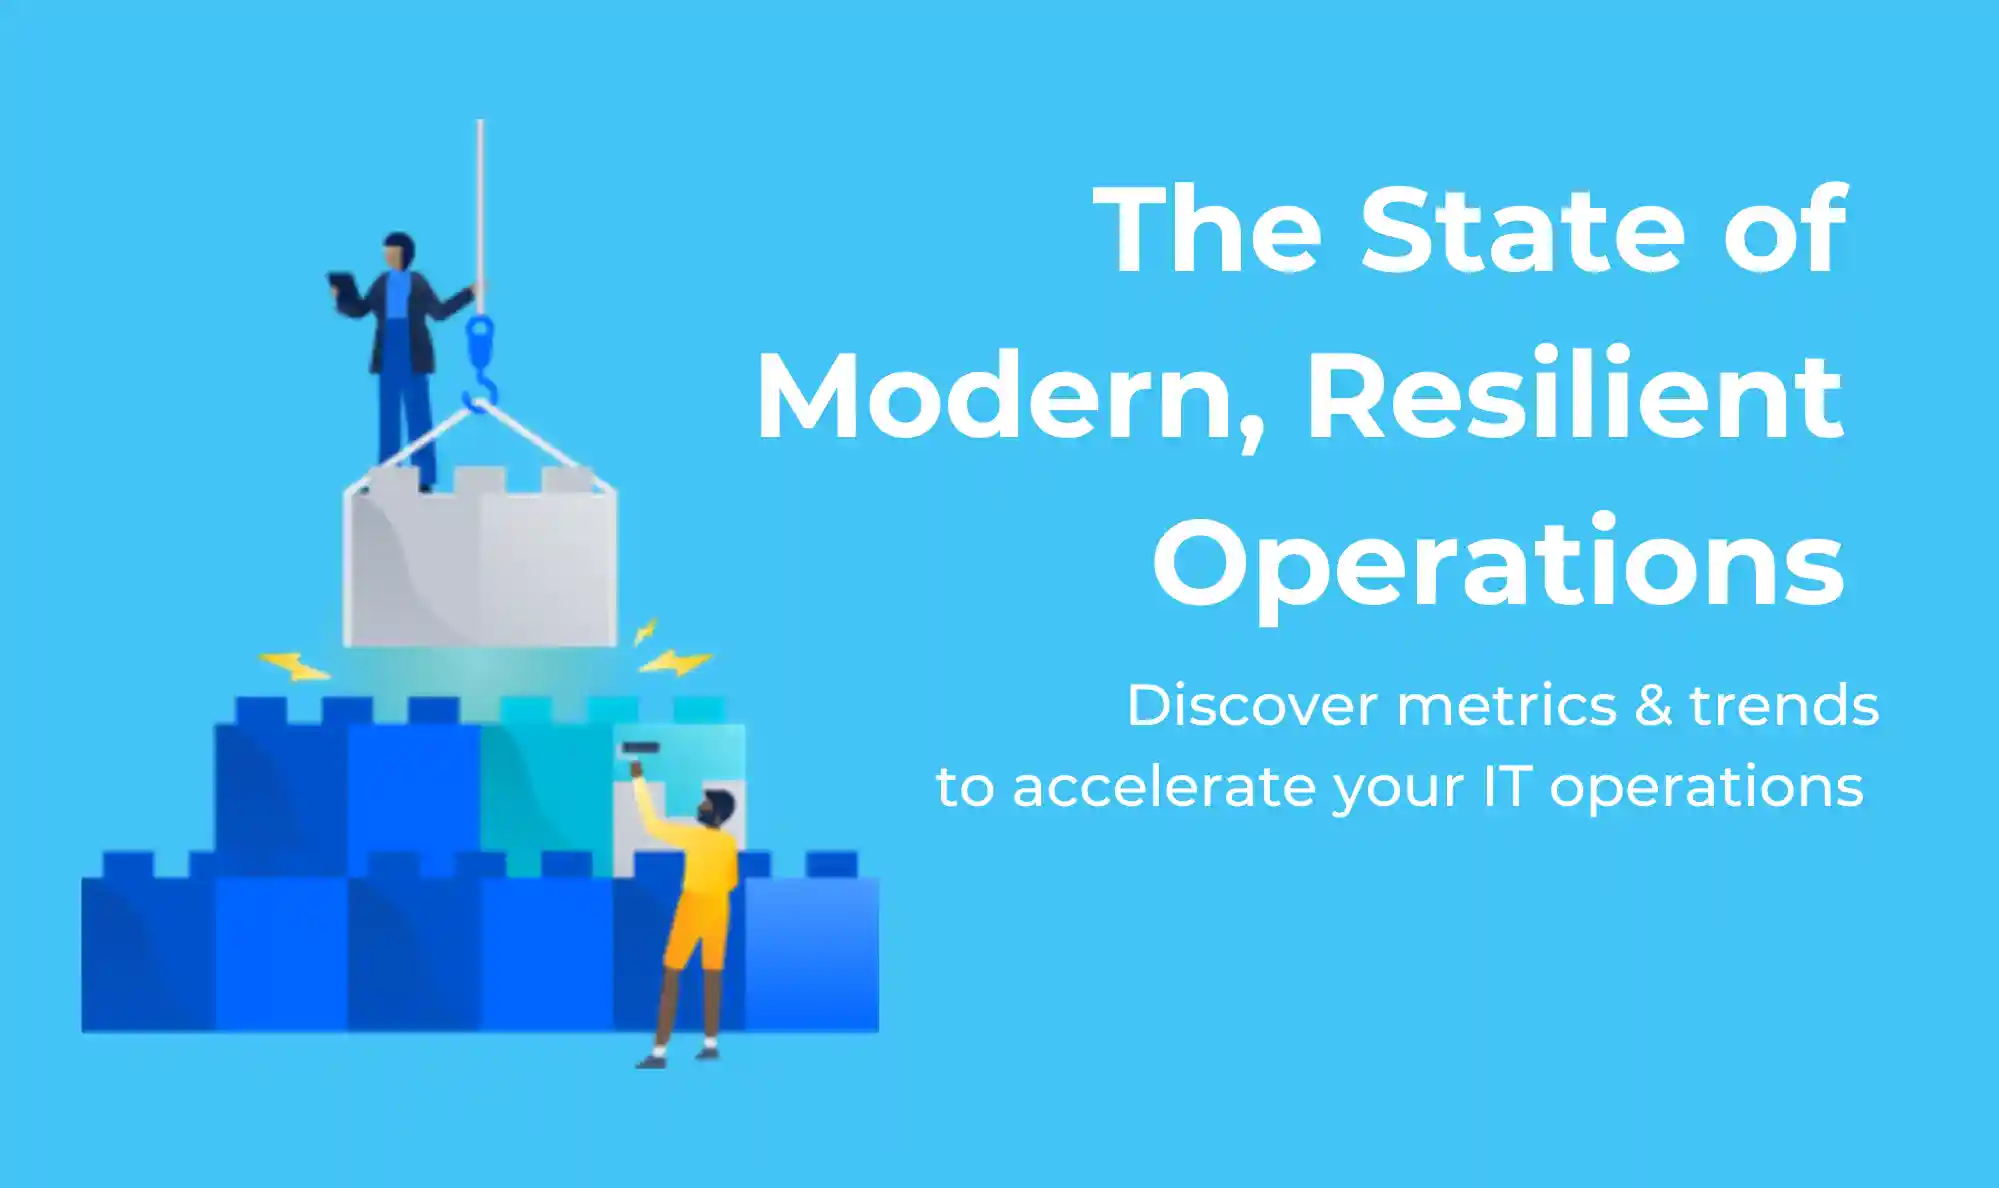 Are your IT Operations resilient?